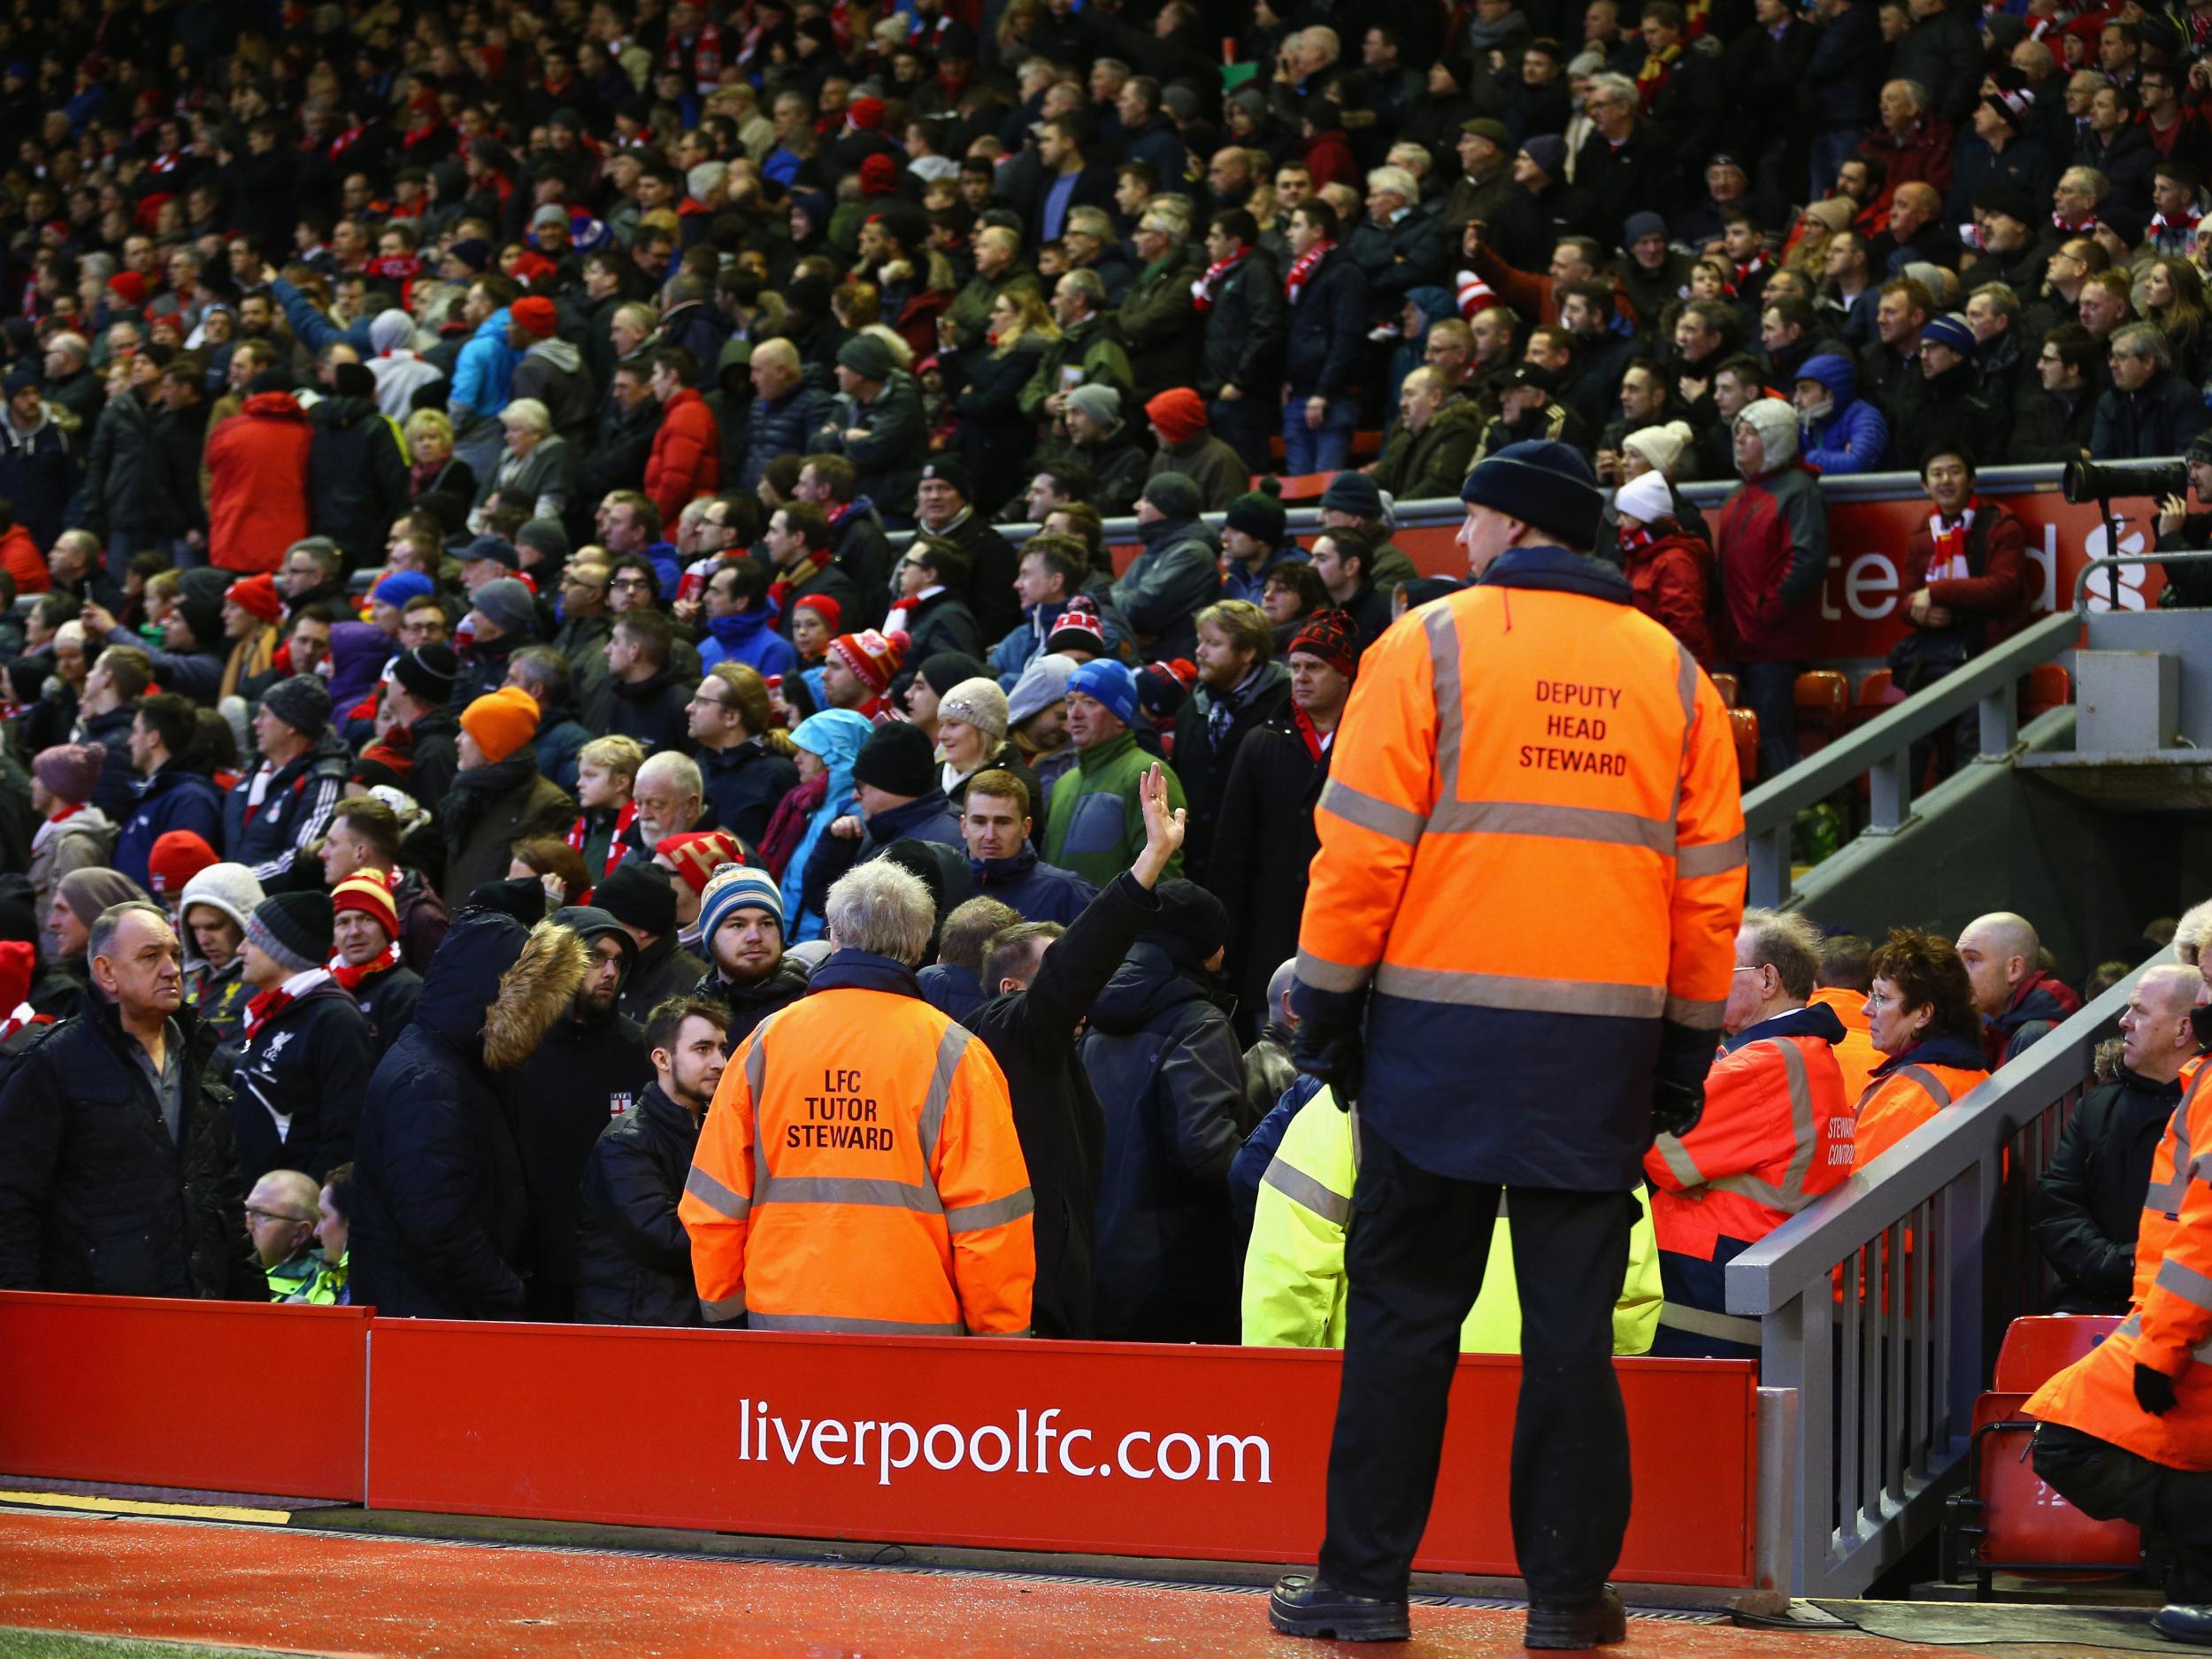 Liverpool fans walk out in protest against ticket prices